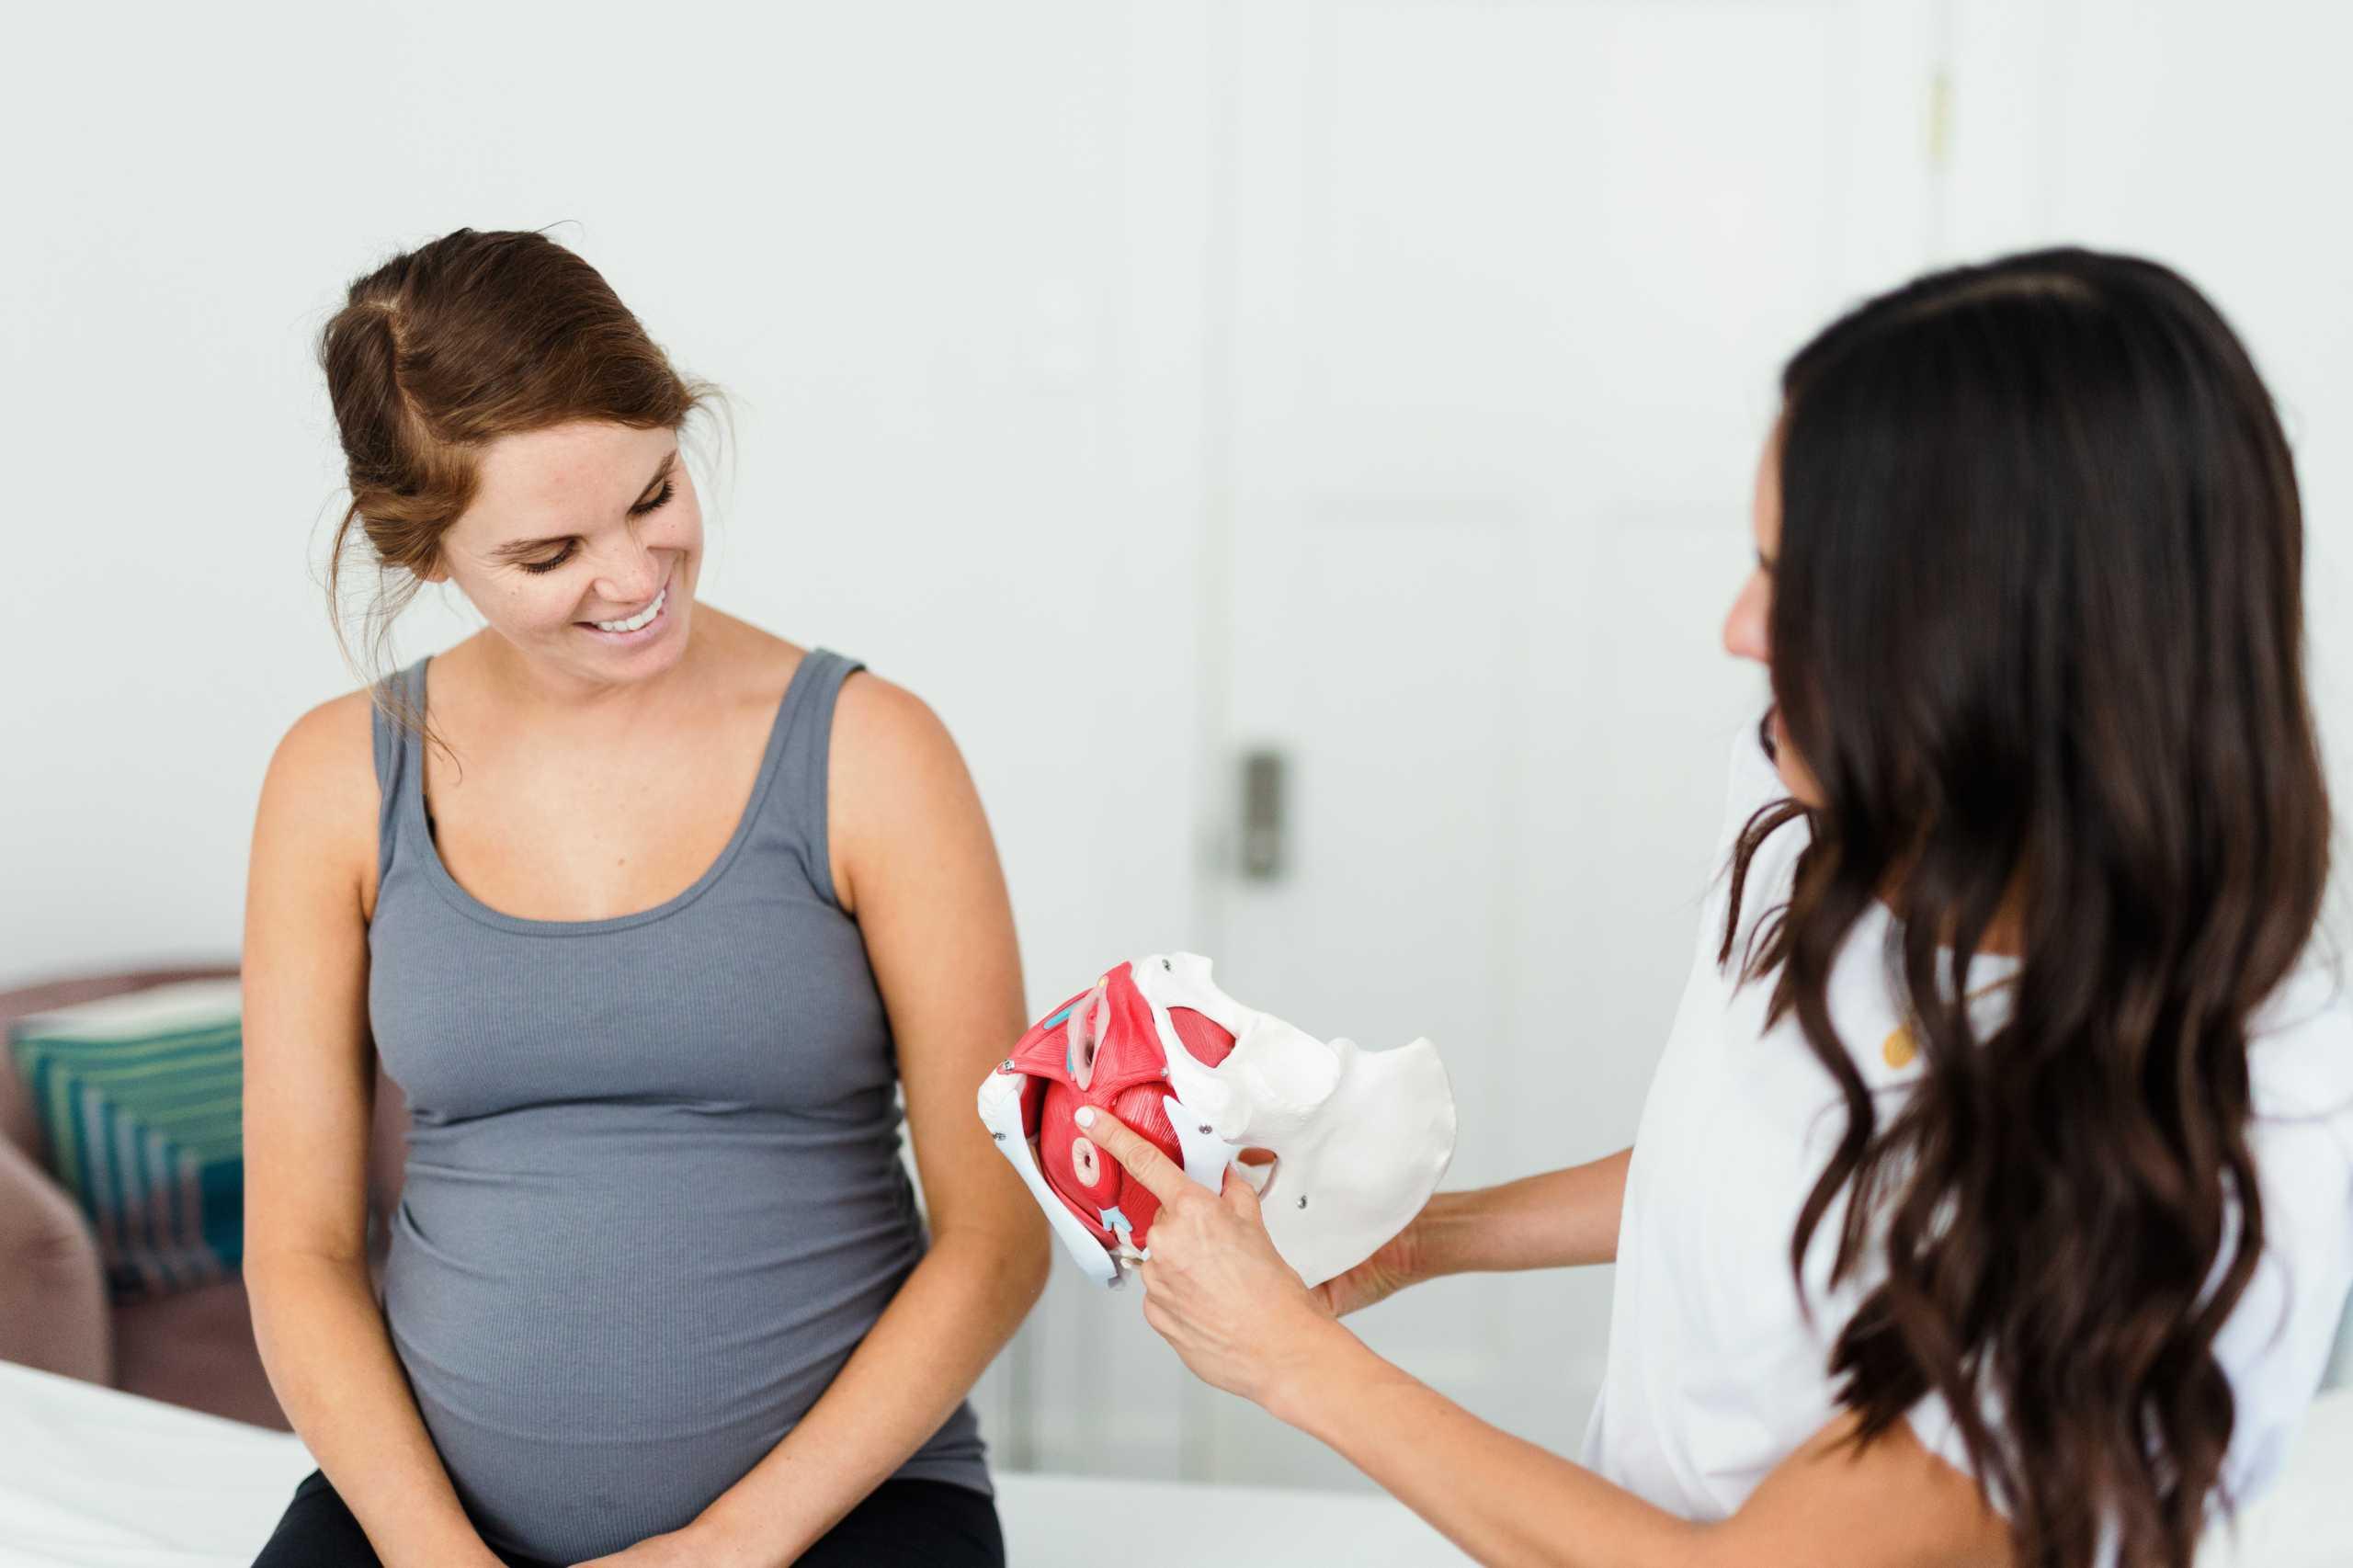 4 Tips to Prepare Your Pelvic Floor for Birth